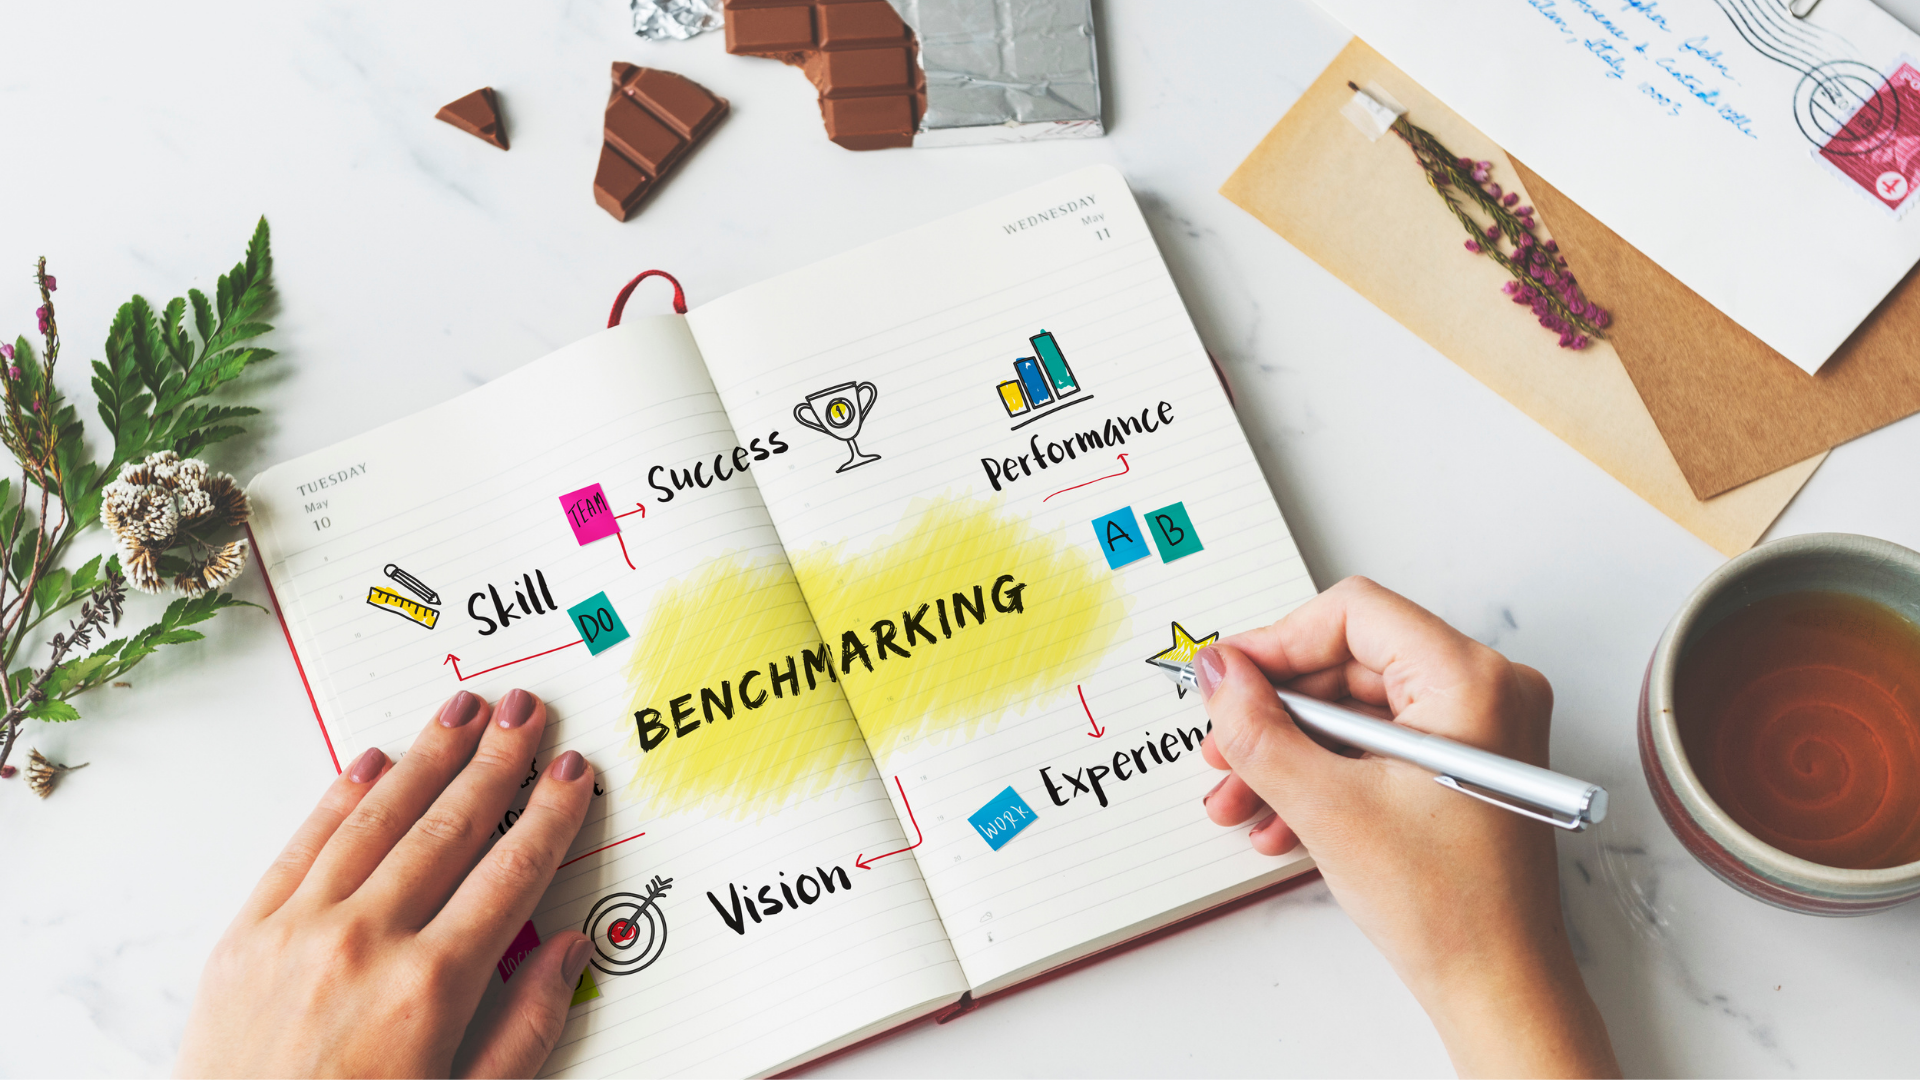 Learn about the Benchmarking process and its importance for a company!